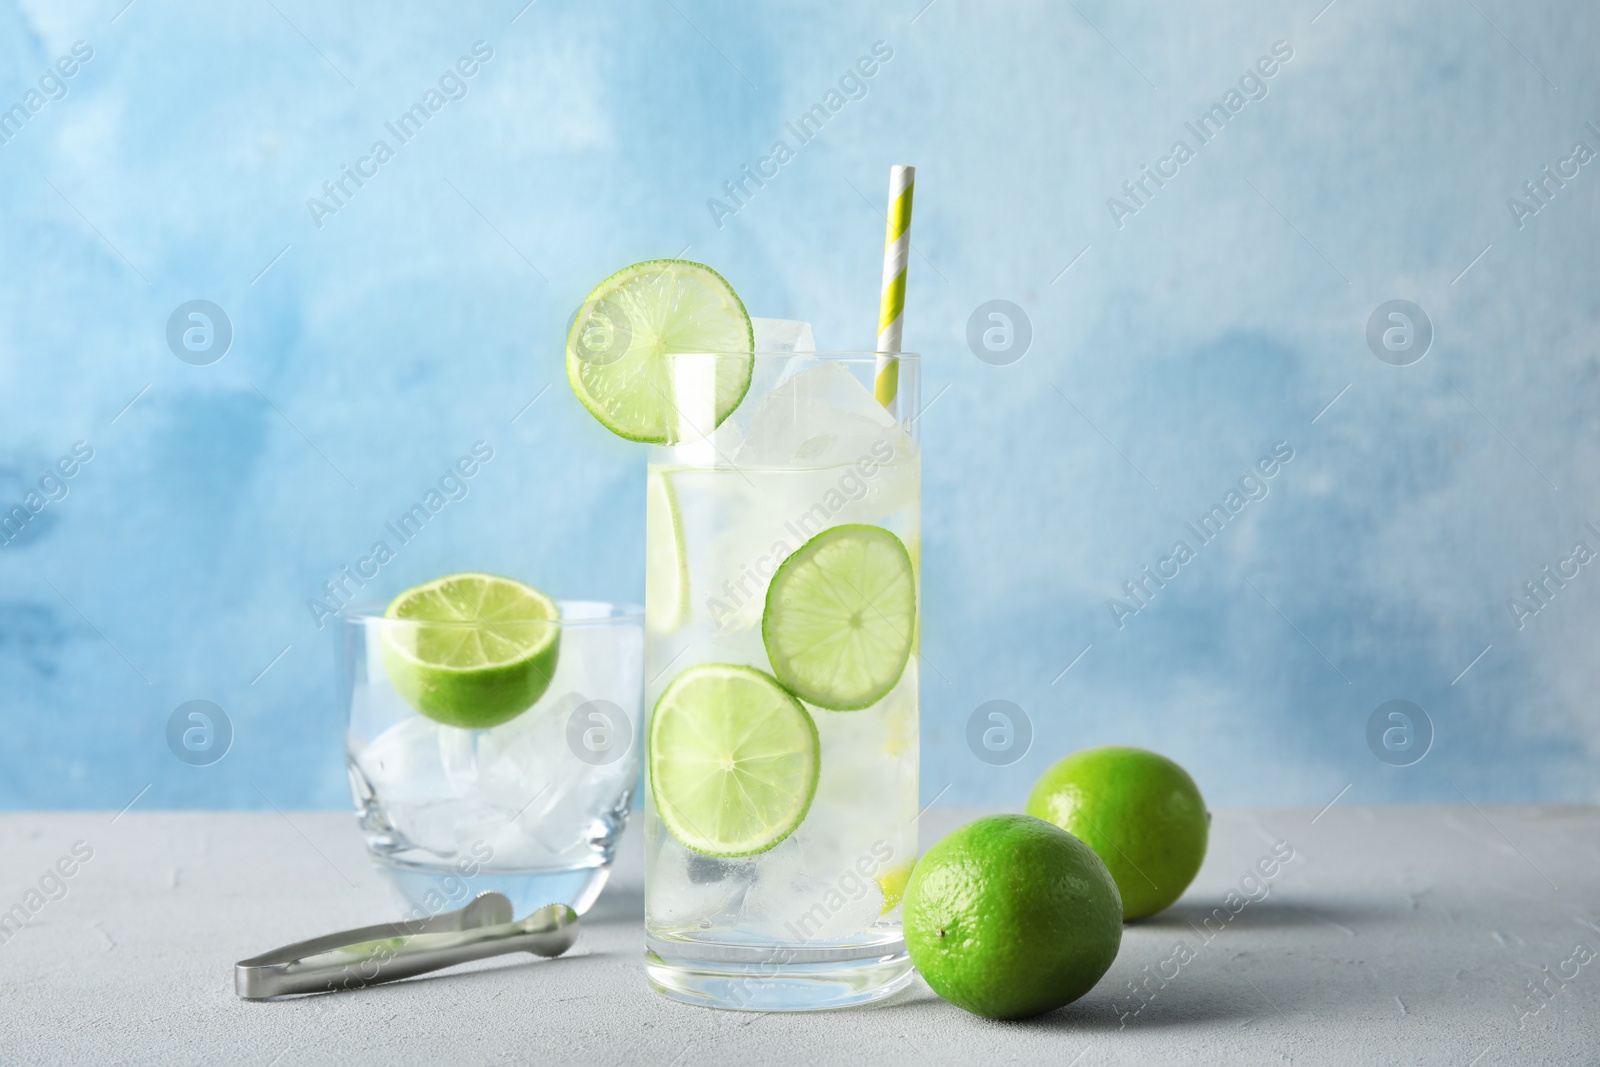 Photo of Composition with lime drink and ice cubes in glass on table against color background